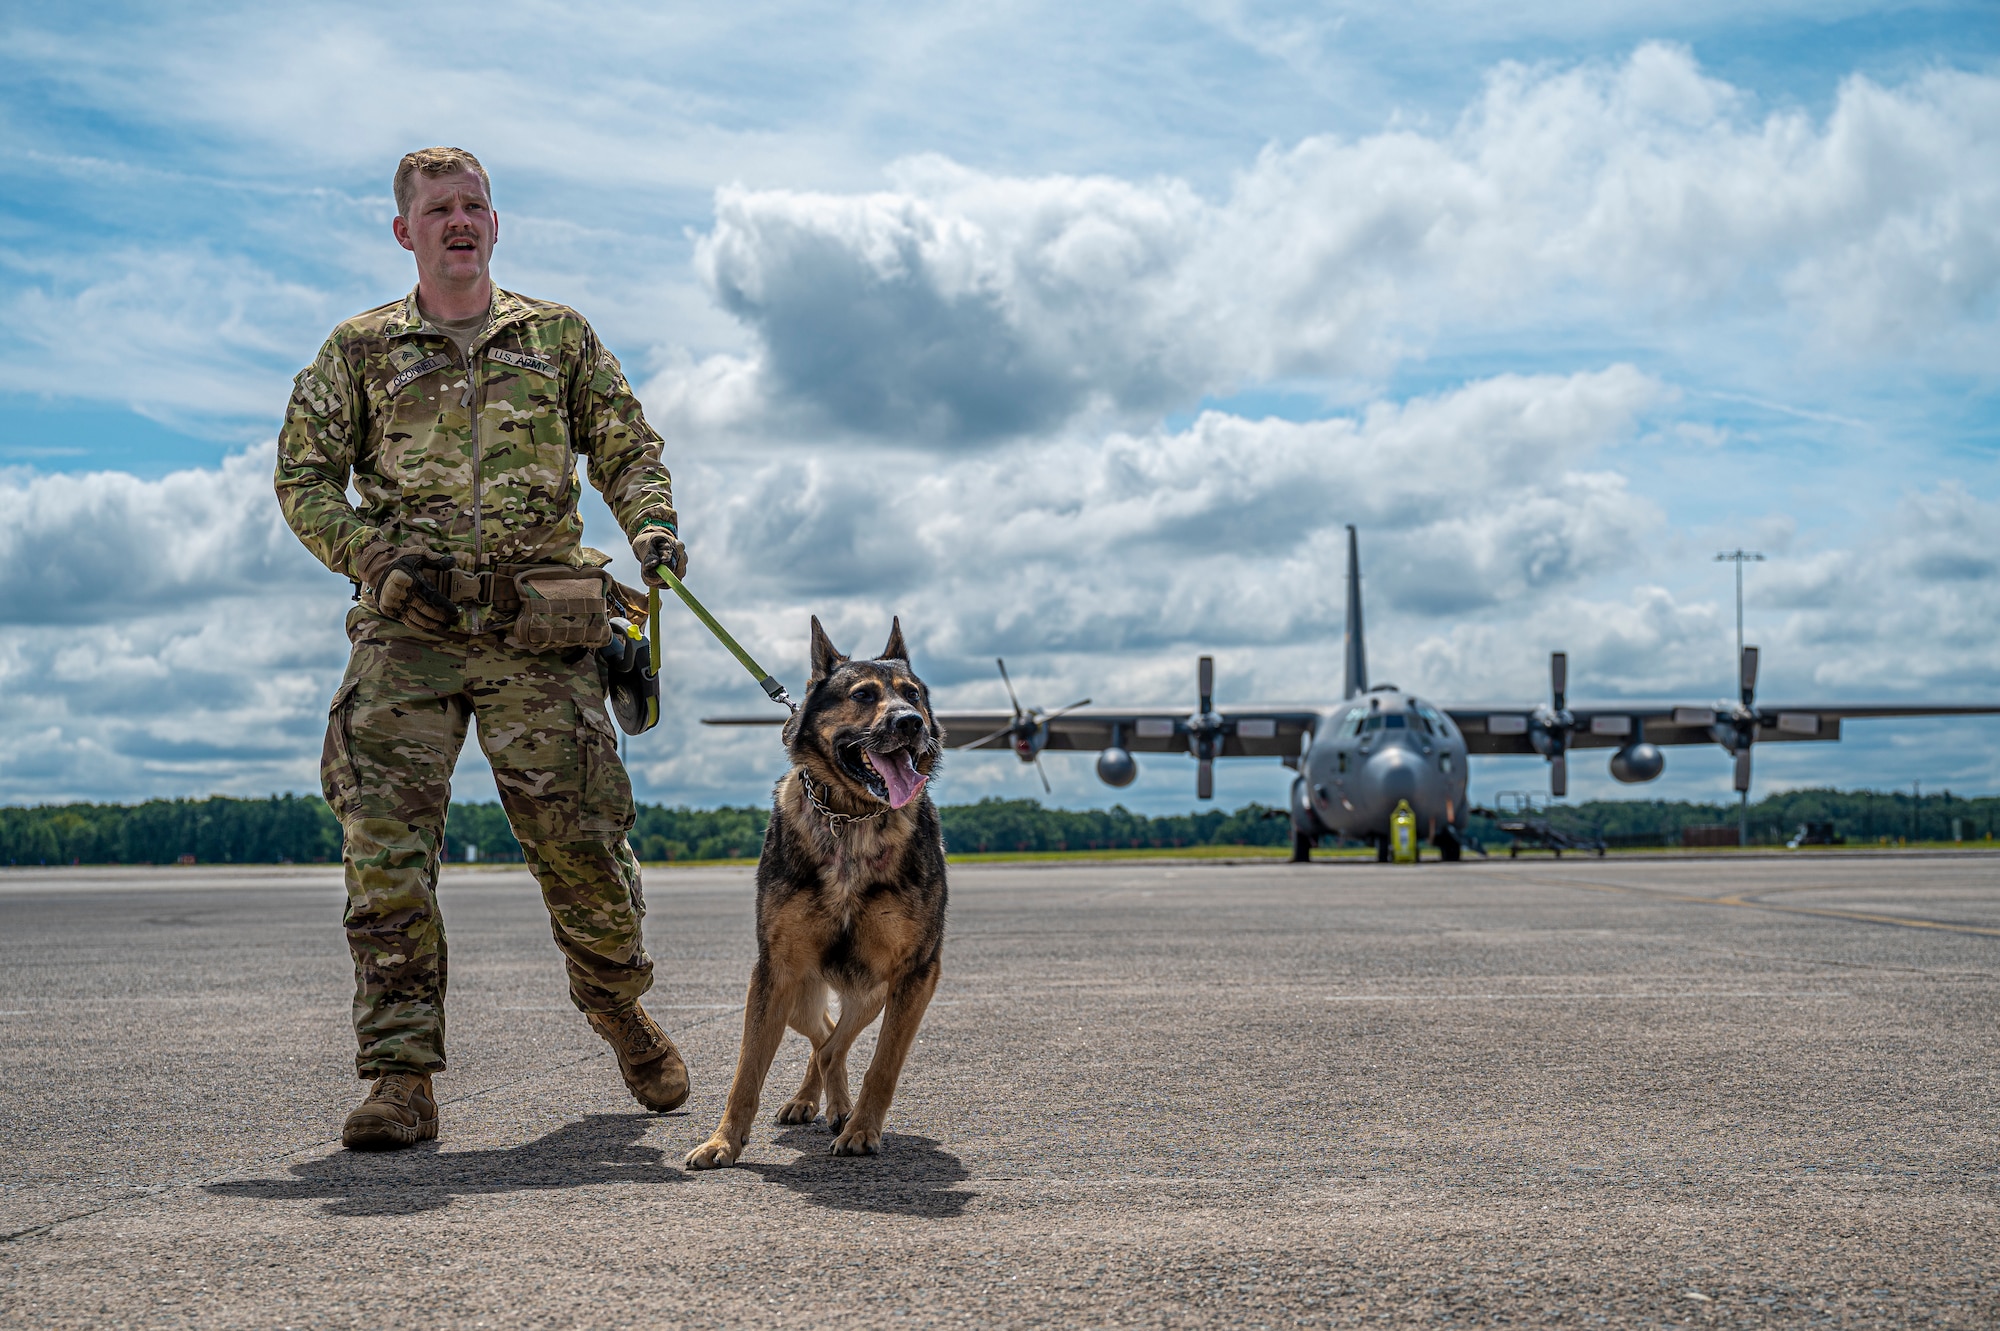 U.S. Army Sgt. Kevin O'Connell and his working dog, Misha, walk across the tarmac of Bradley Air National Guard Base in East Granby, Conn., to investigate a C-130H aircraft as part of a training exercise Aug. 29, 2023. This training was designed to help handlers and their K-9 step outside their comfort zone, train in an unfamiliar environment, and build rapport with their sister service.